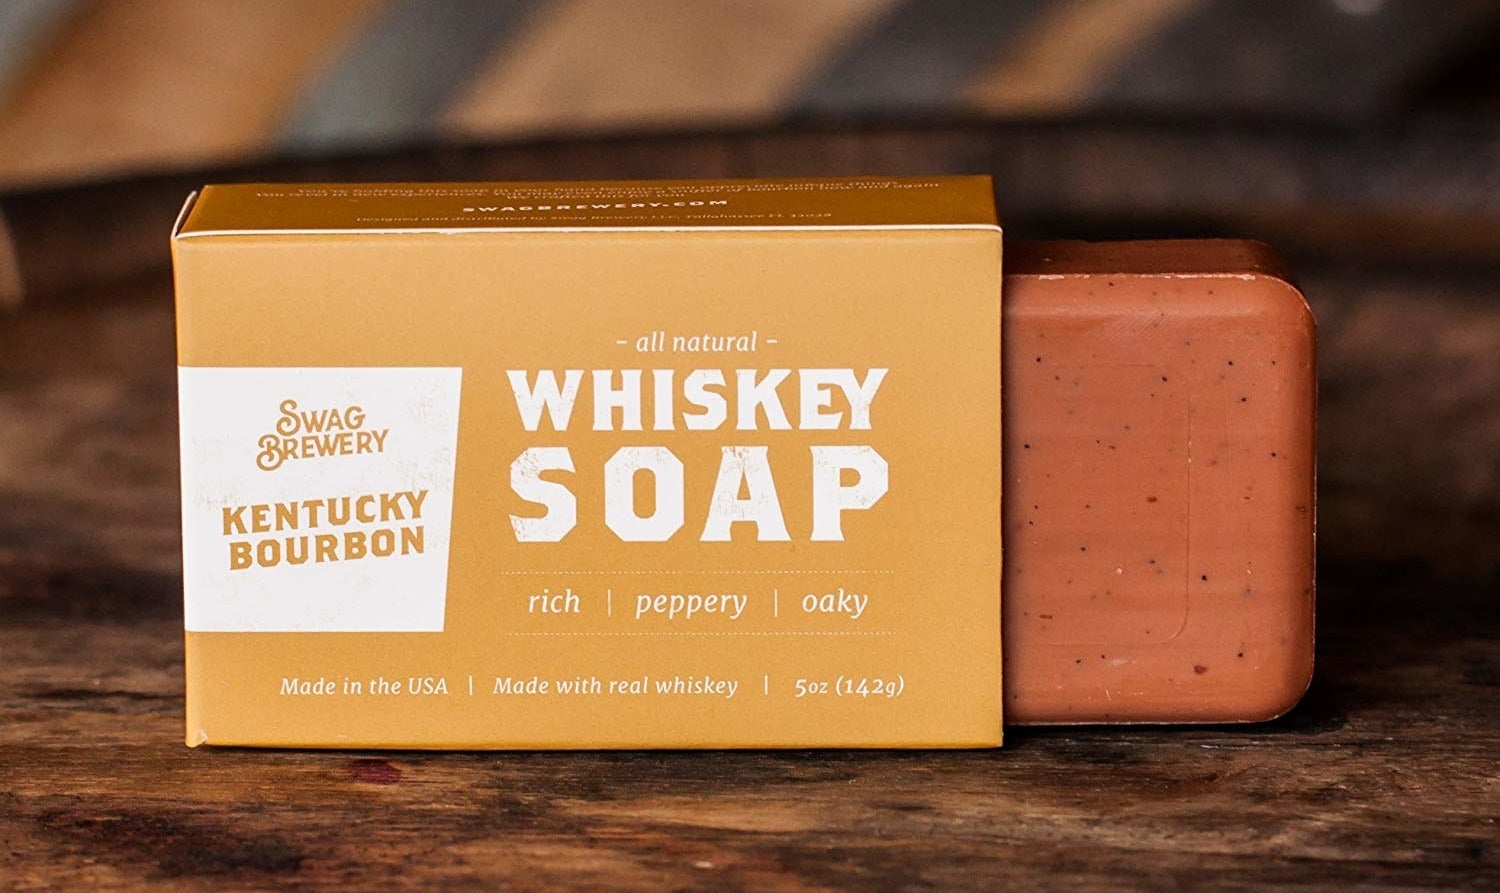 A close up of the whiskey bar of soap